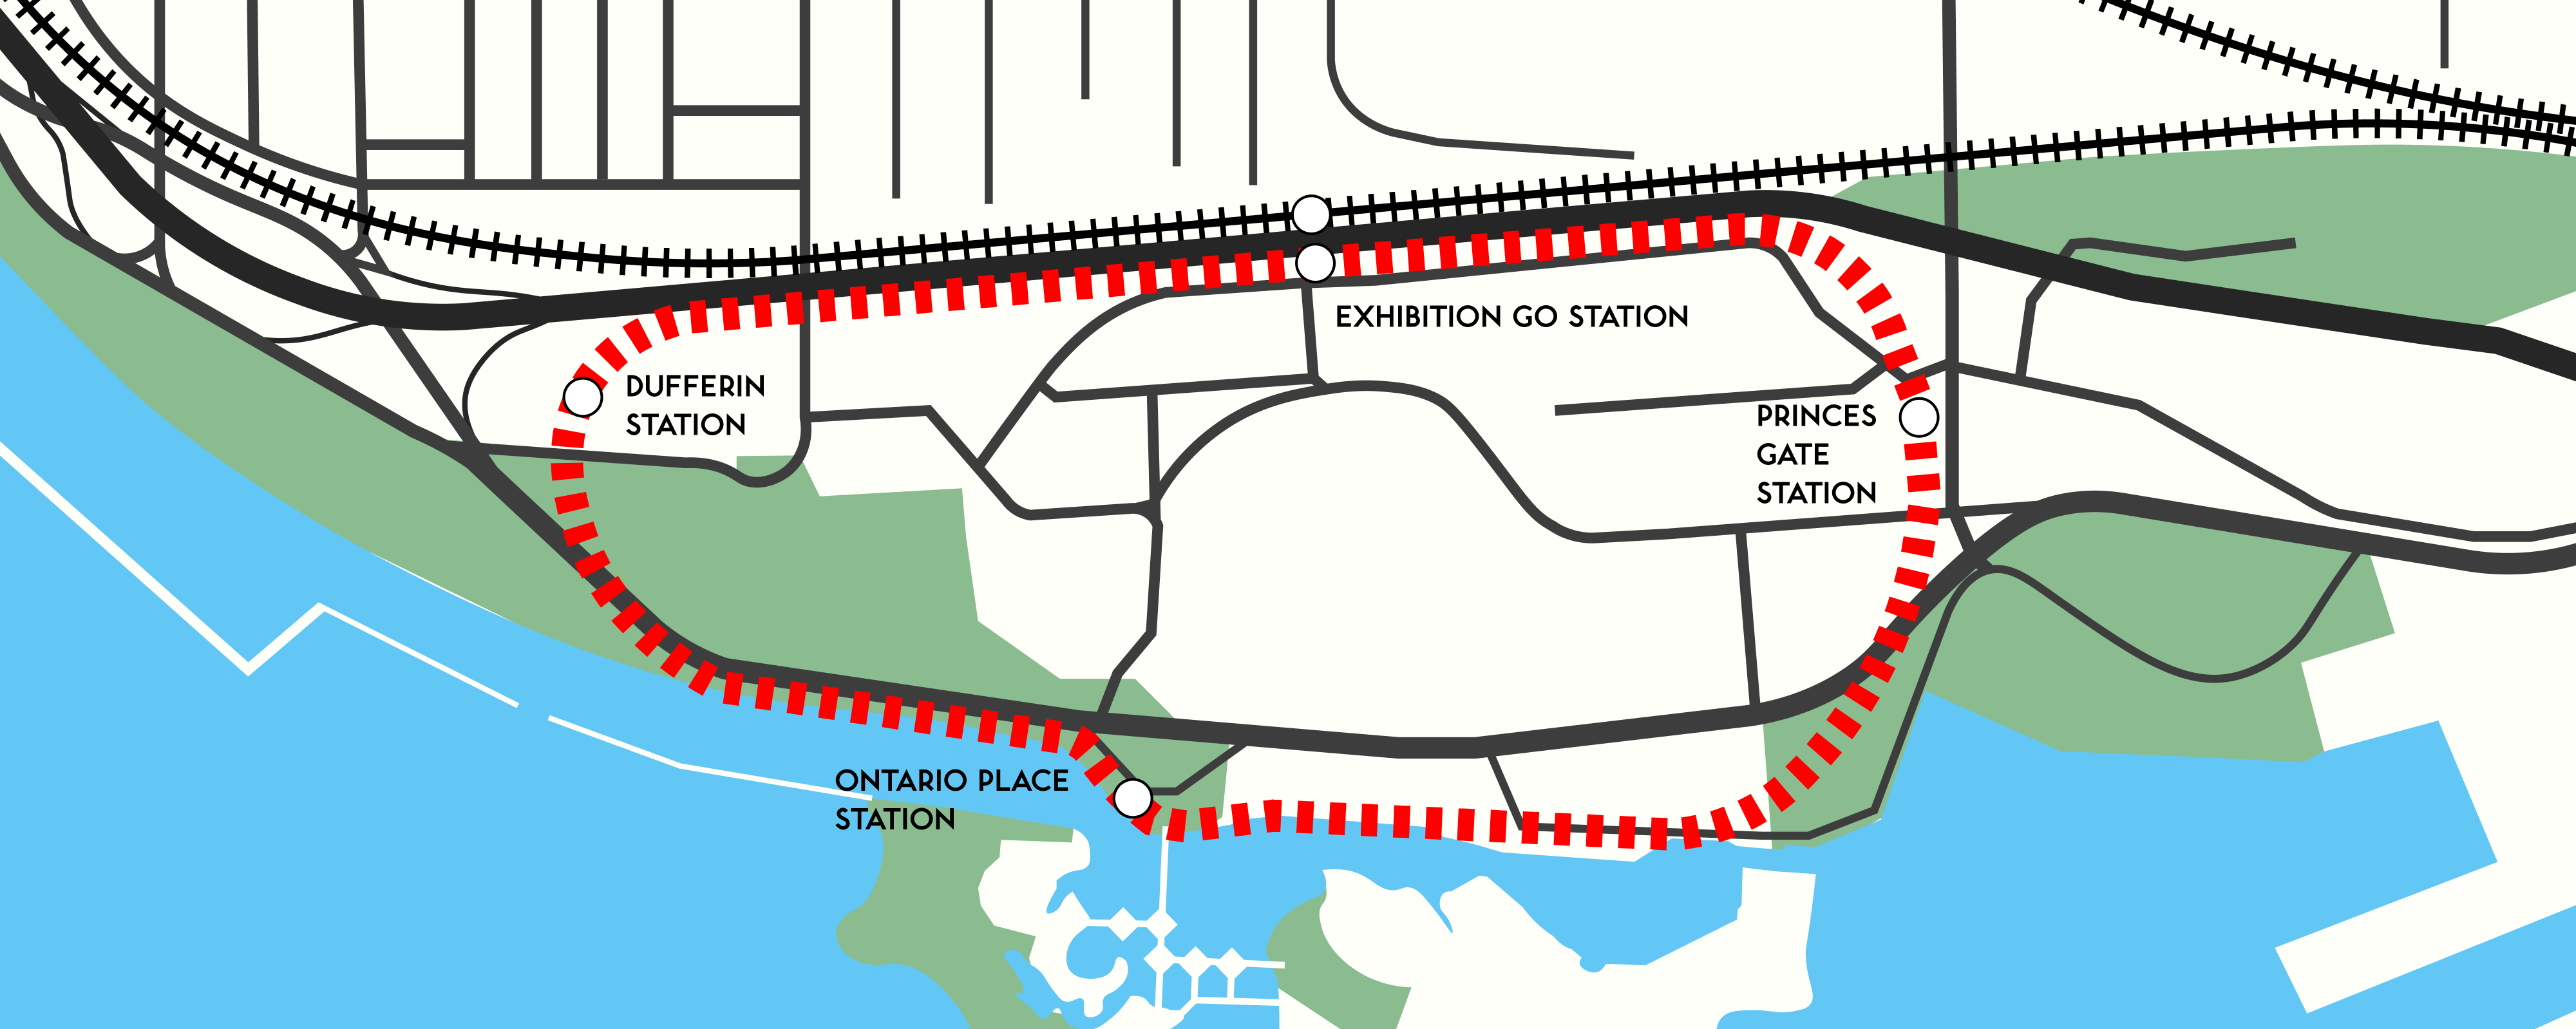 This image shows the proposed demonstration track for the GO-Urban system, which started construction late in 1973. There would be four stations, one at Exhibition GO Station/streetcar loop, one at Dufferin Street, one across Ontario Place, and one at Princes Gate. It was overbudget and was ultimately never completed following the cancellation of GO-Urban.